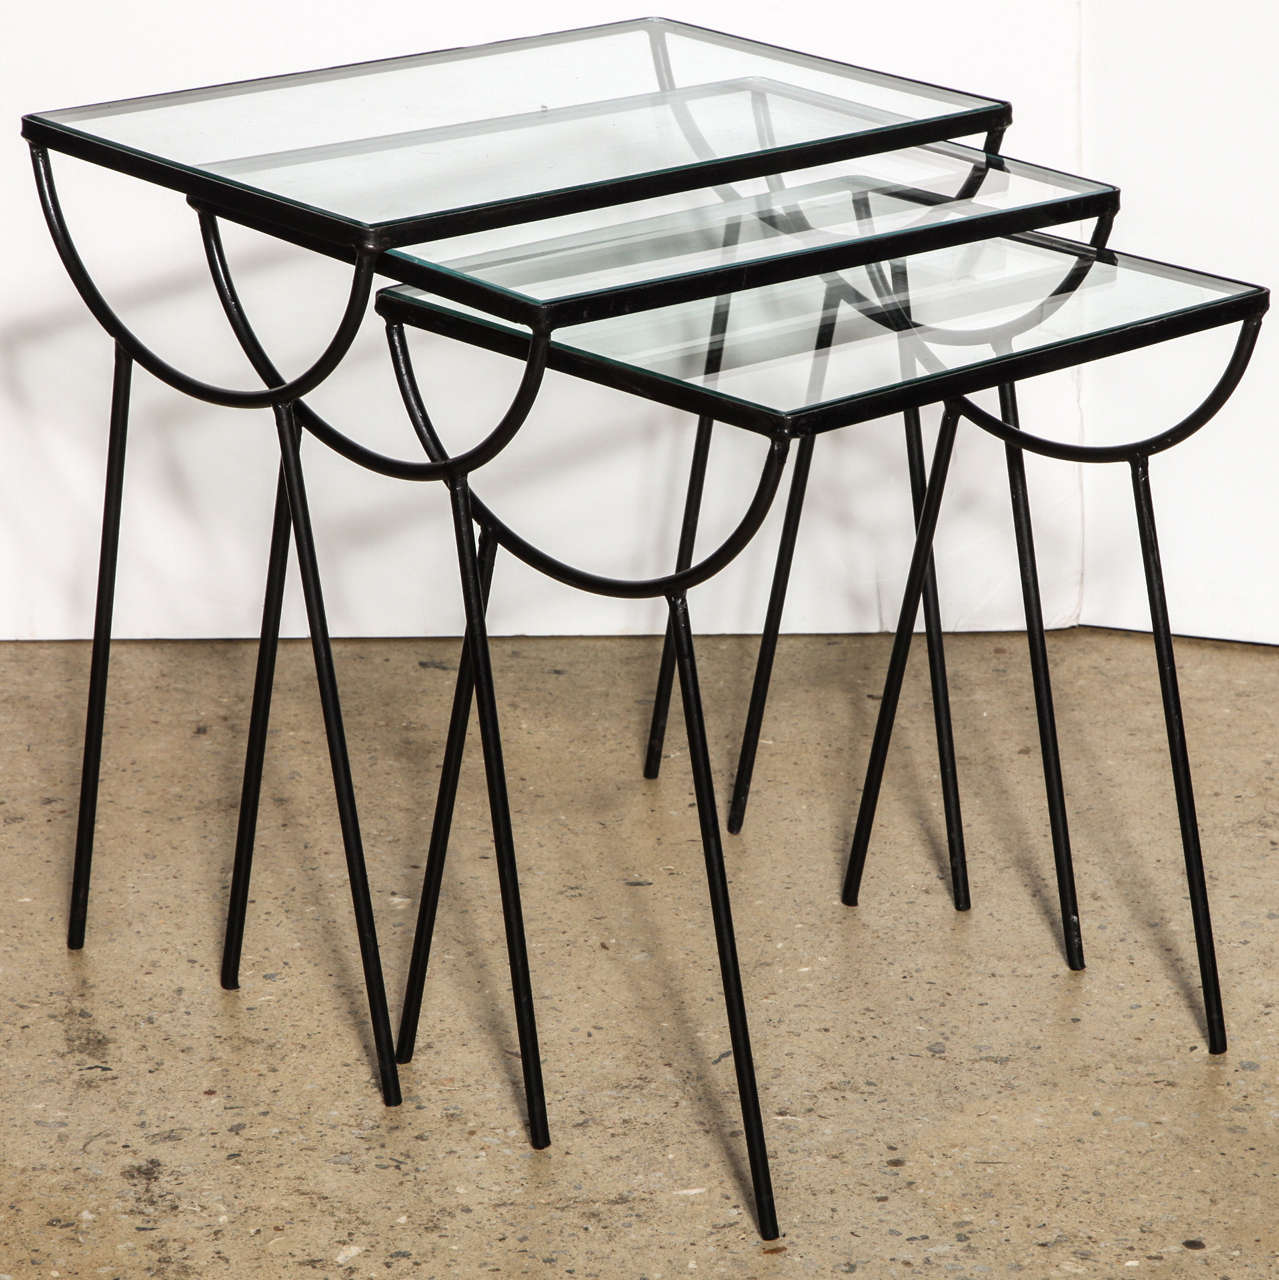 3 George Nelson style for Wrought Iron and Glass Indoor Outdoor Occasional Tables.  Complete with new 3/8